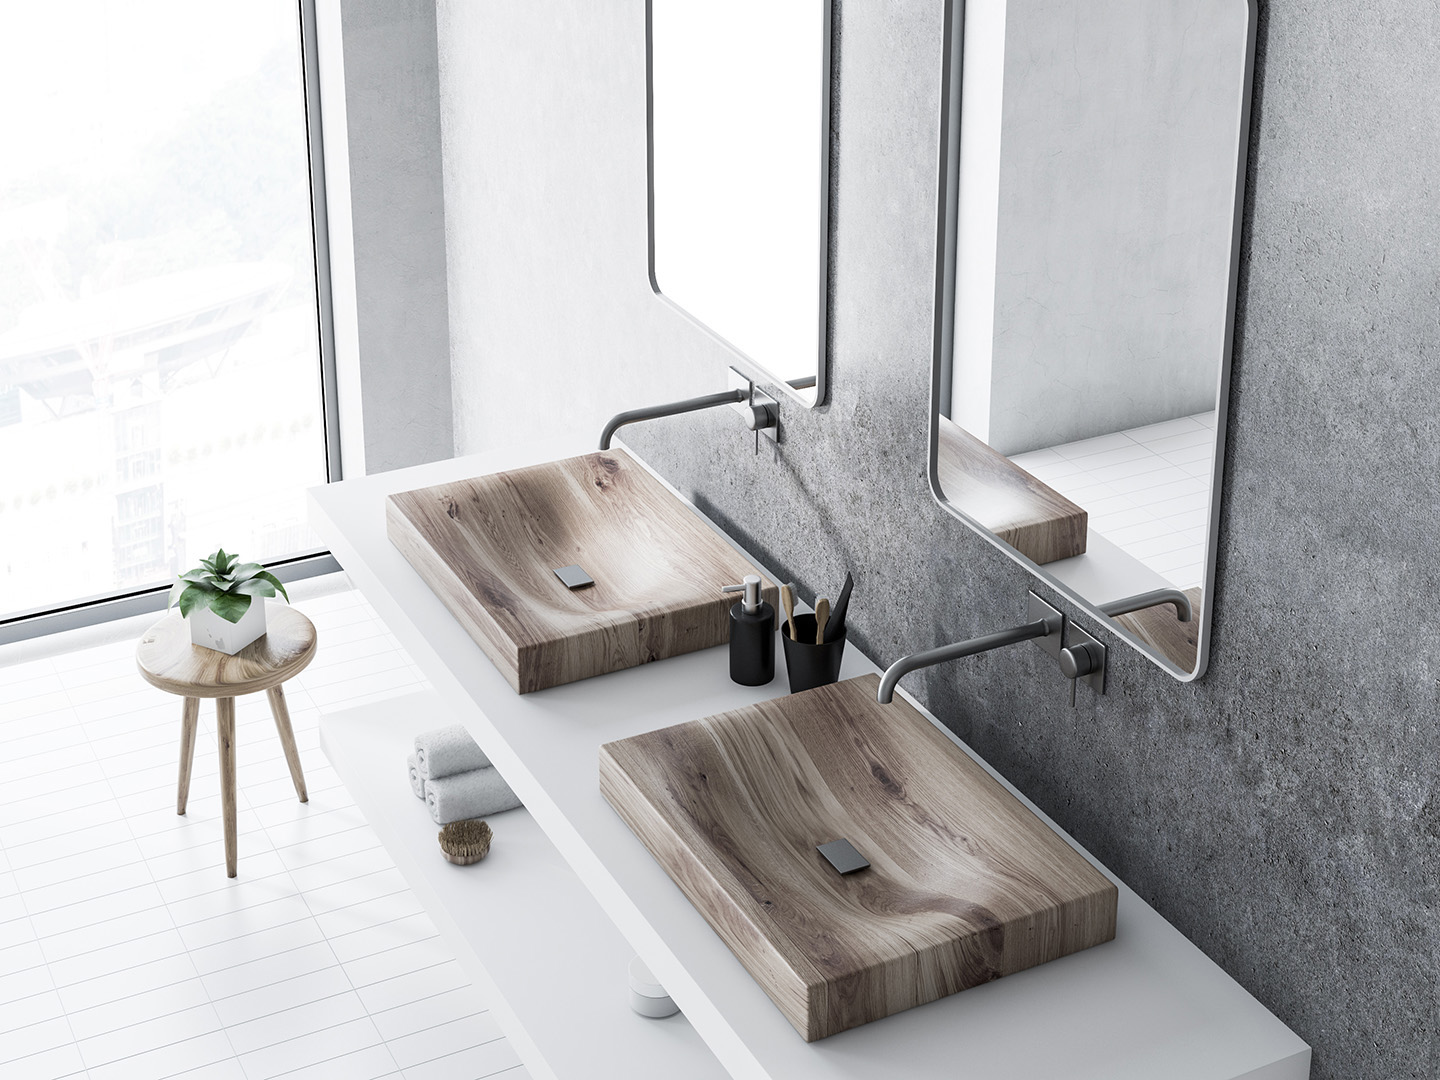 Wooden sinks: Sustainable design for your dream bathroom